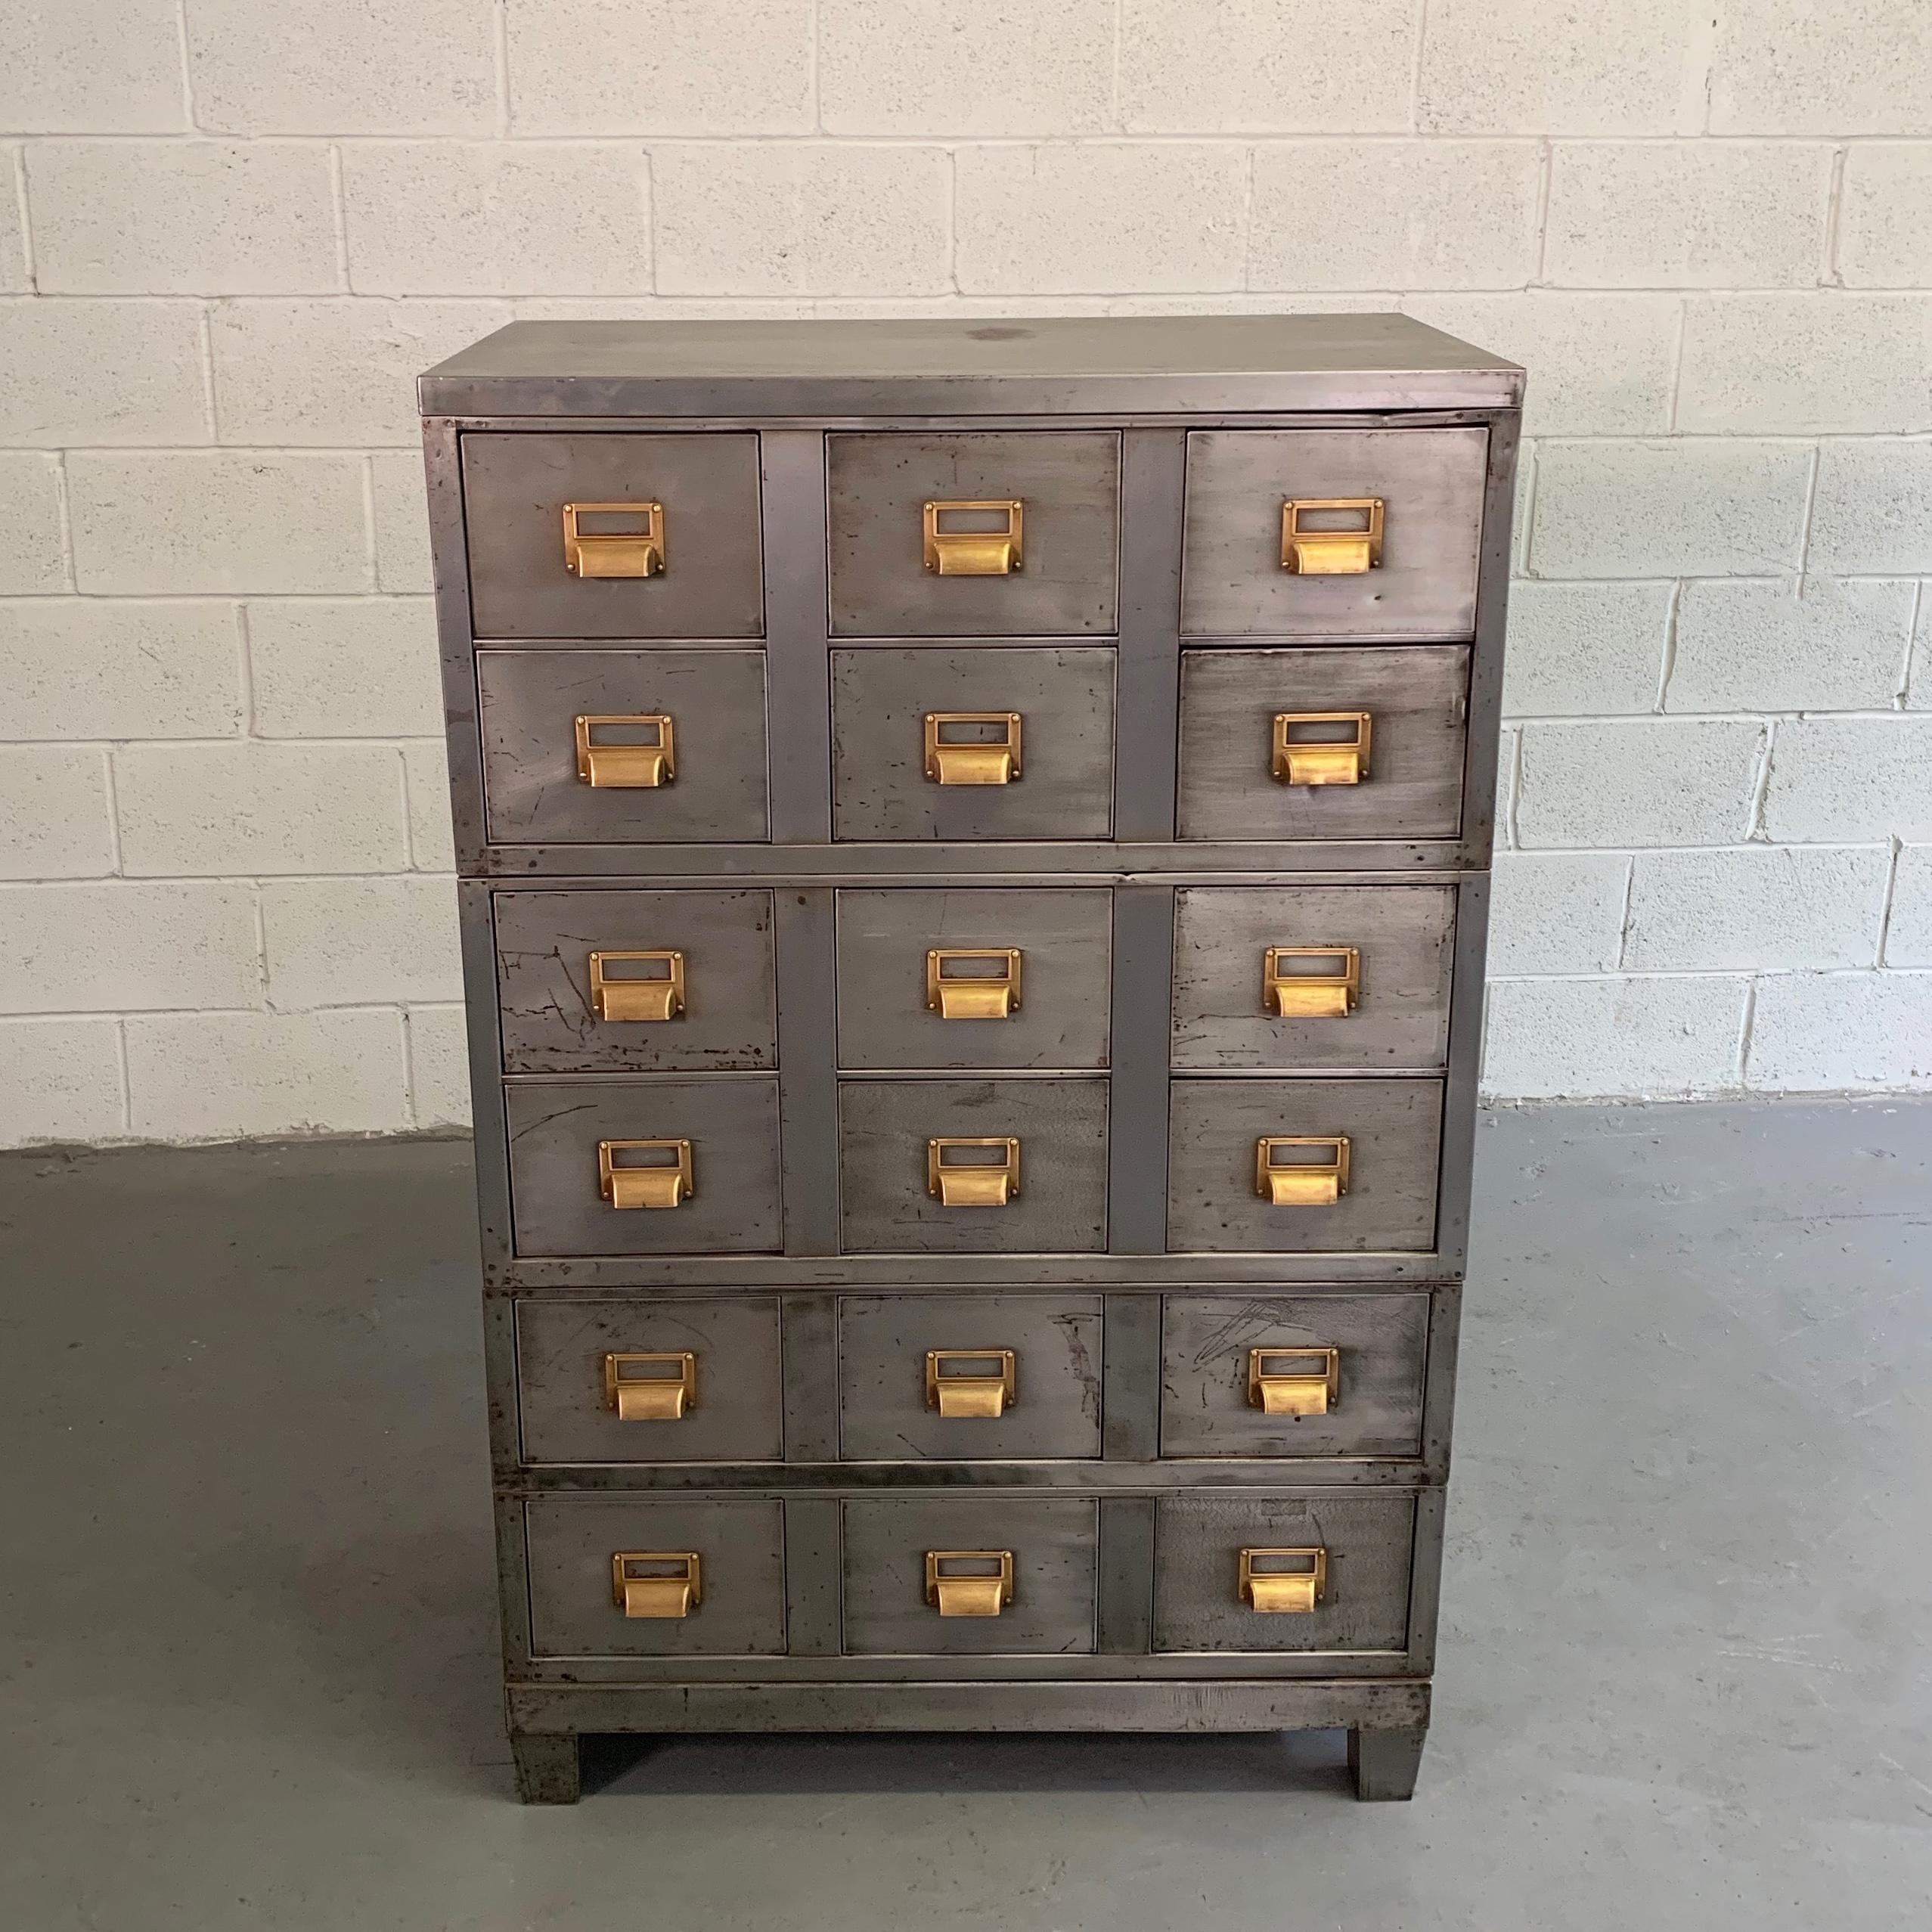 Industrial, brushed steel, office cabinet features 18 index size drawers with brass hardware that measure 9 width x 6 height inches with interiors of 8 width x 16 deep. There are 3, modular, stacked units that comprise this cabinet.